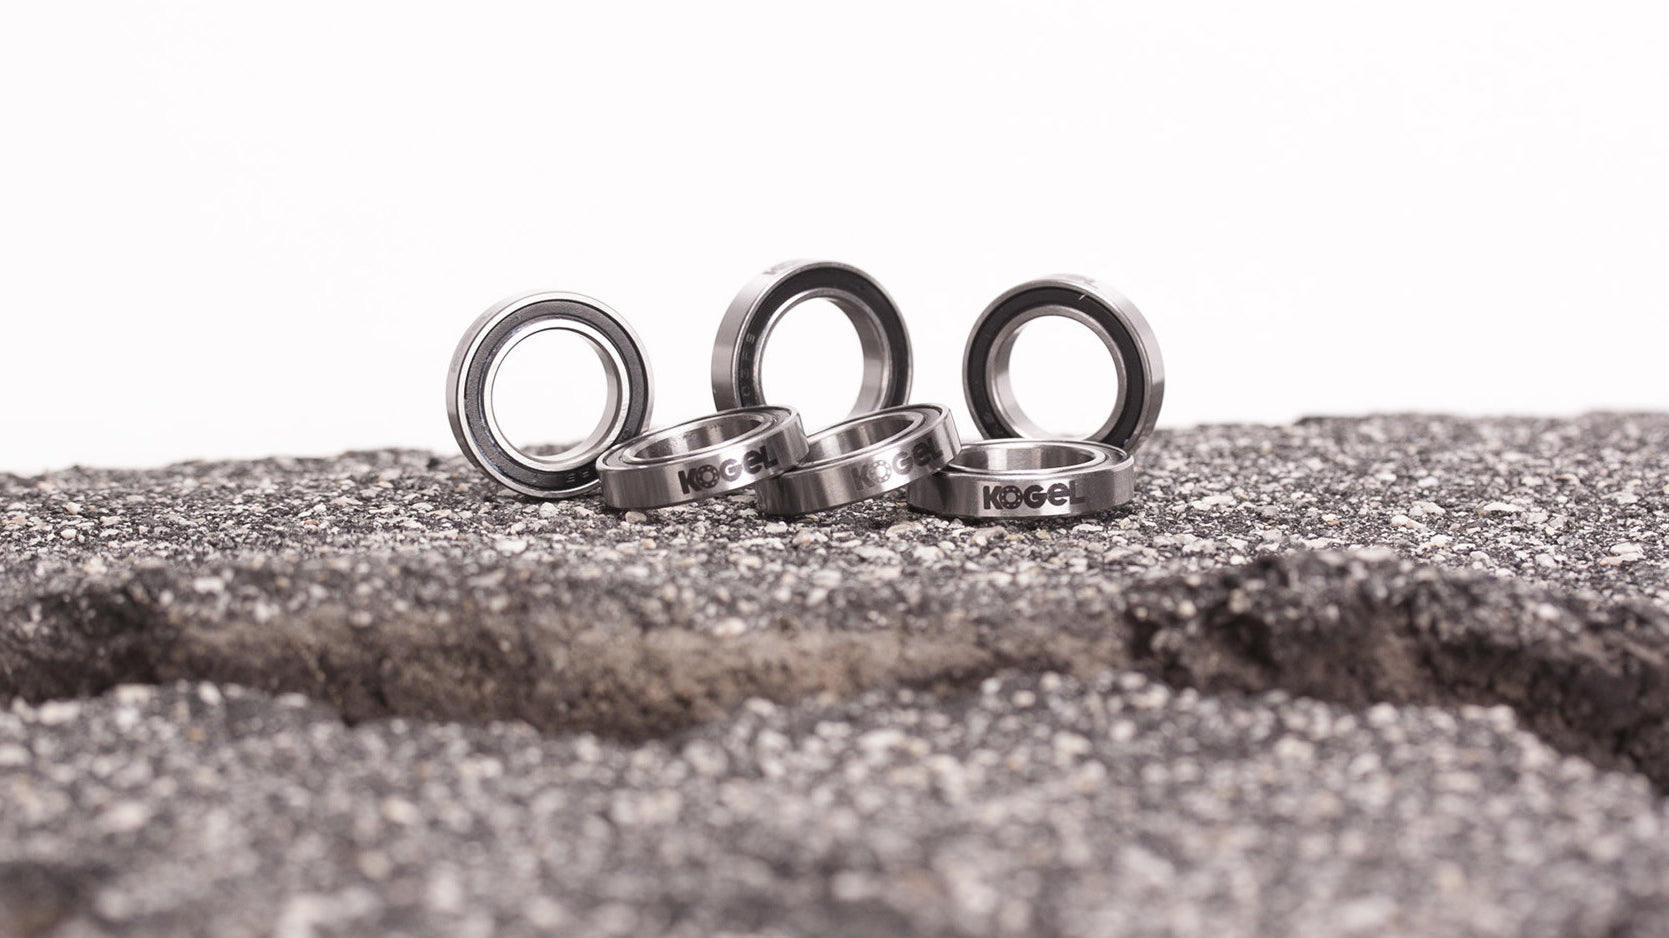 What makes a good ball bearing a great ball bearing for bicycles? Part 1